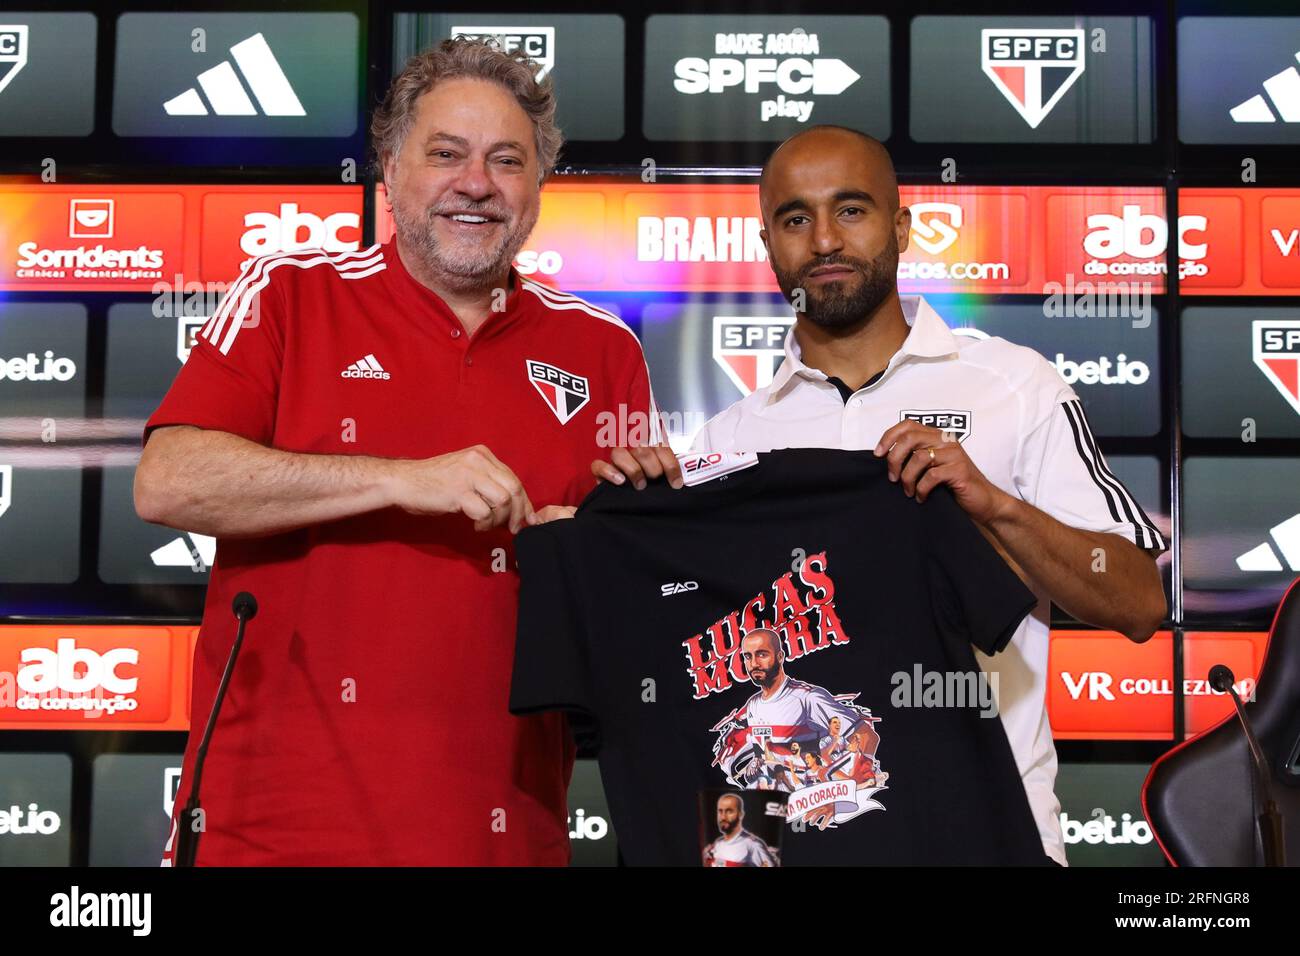 Presentation of the new reinforcement of São Paulo, Lucas Moura, with the presence of the president of the club Julio Casares in CT da Barra Funda, west zone of São Paulo, this Friday, the 4th. Credit: Brazil Photo Press/Alamy Live News Stock Photo